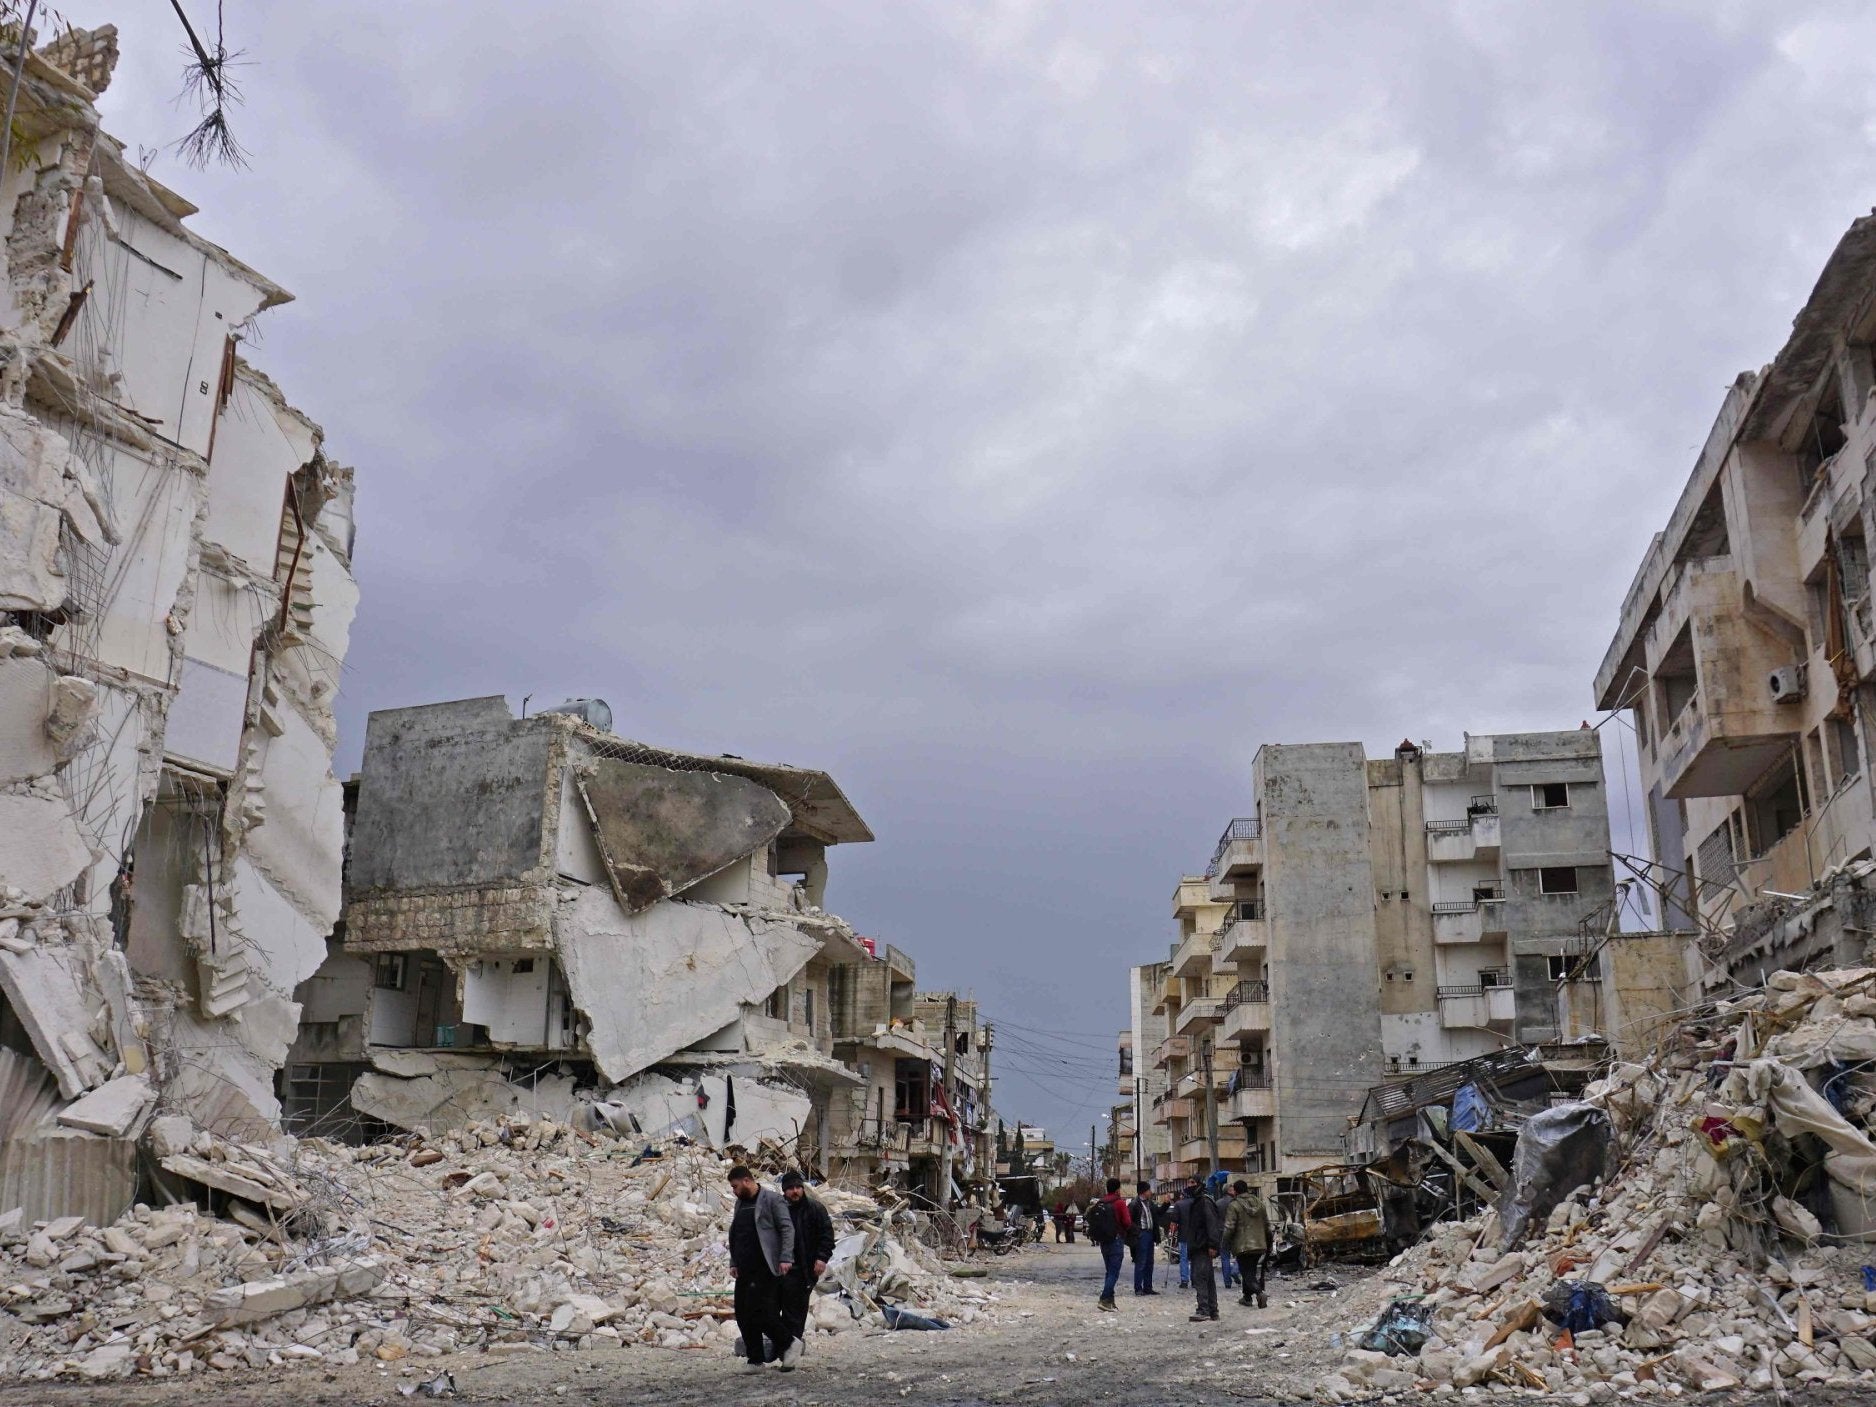 The jihadist-held city of Idlib on 14 March, which has been destroyed in airstrikes